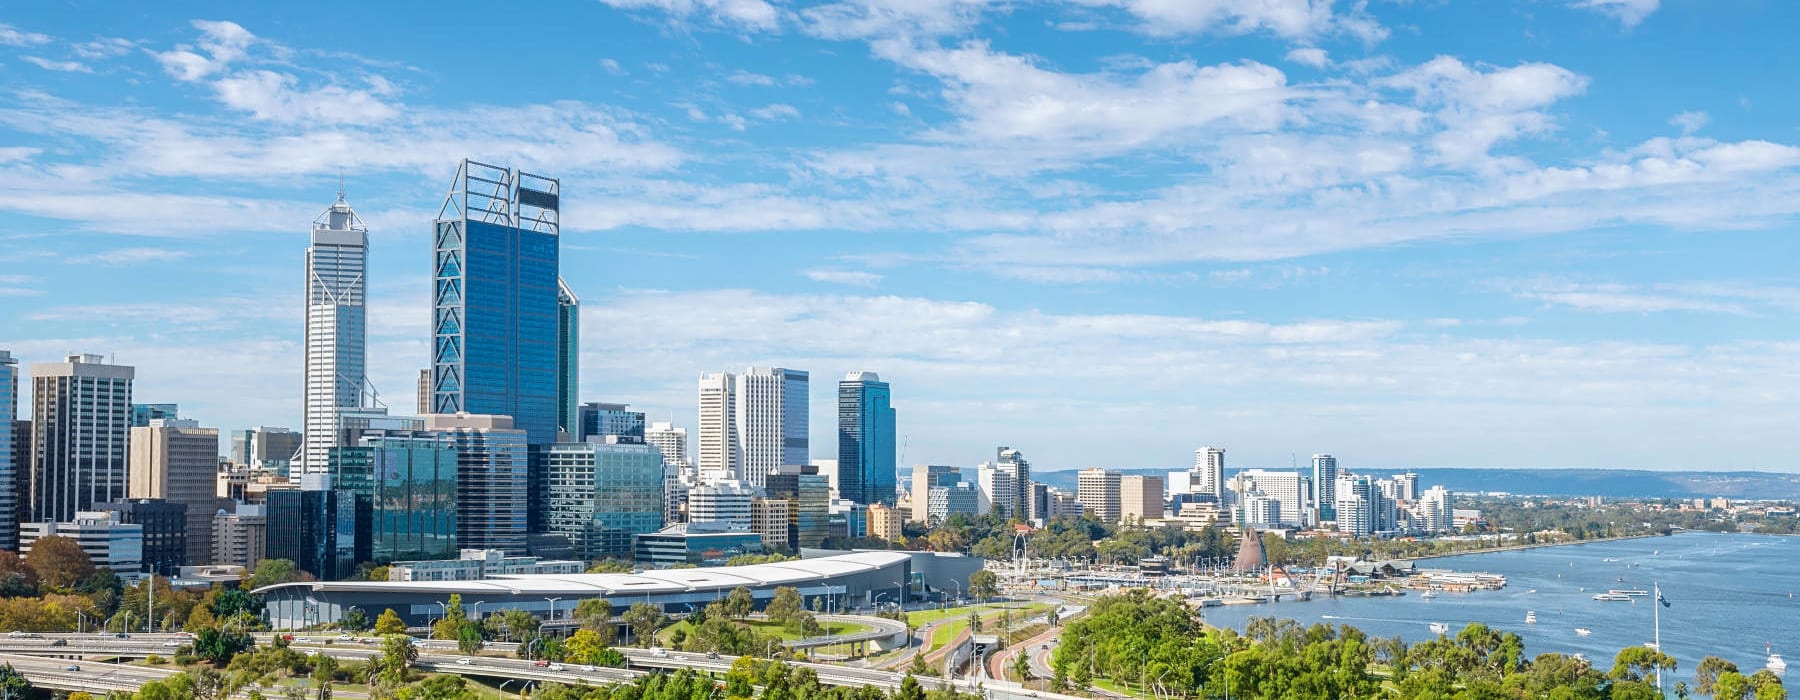 A view of the Perth city skyline - removals to Perth